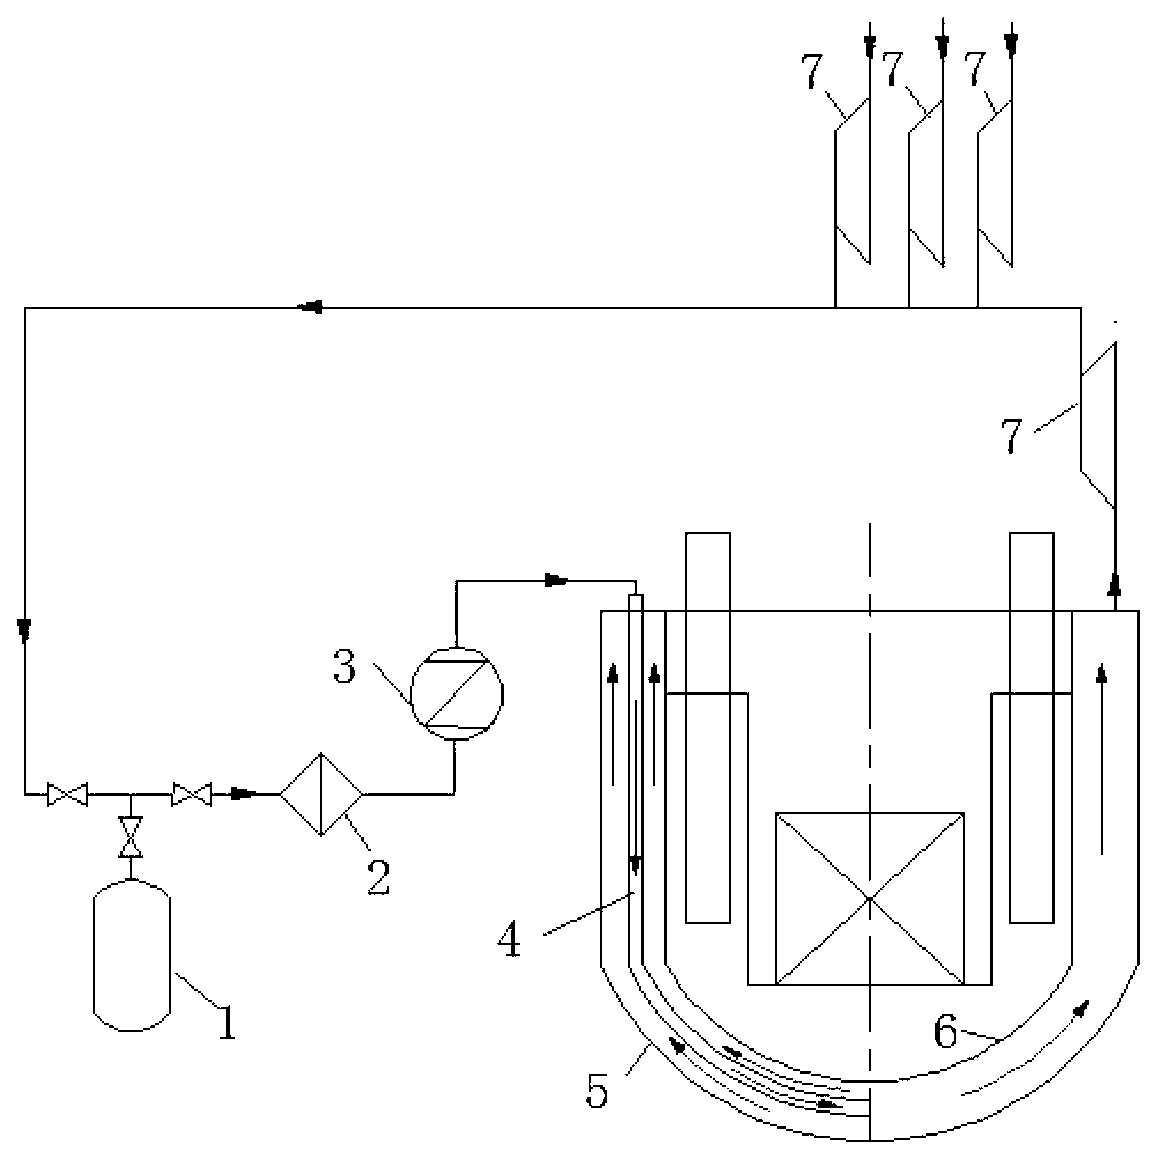 Auxiliary heating system for liquid-metal-cooled natural circulation reactor